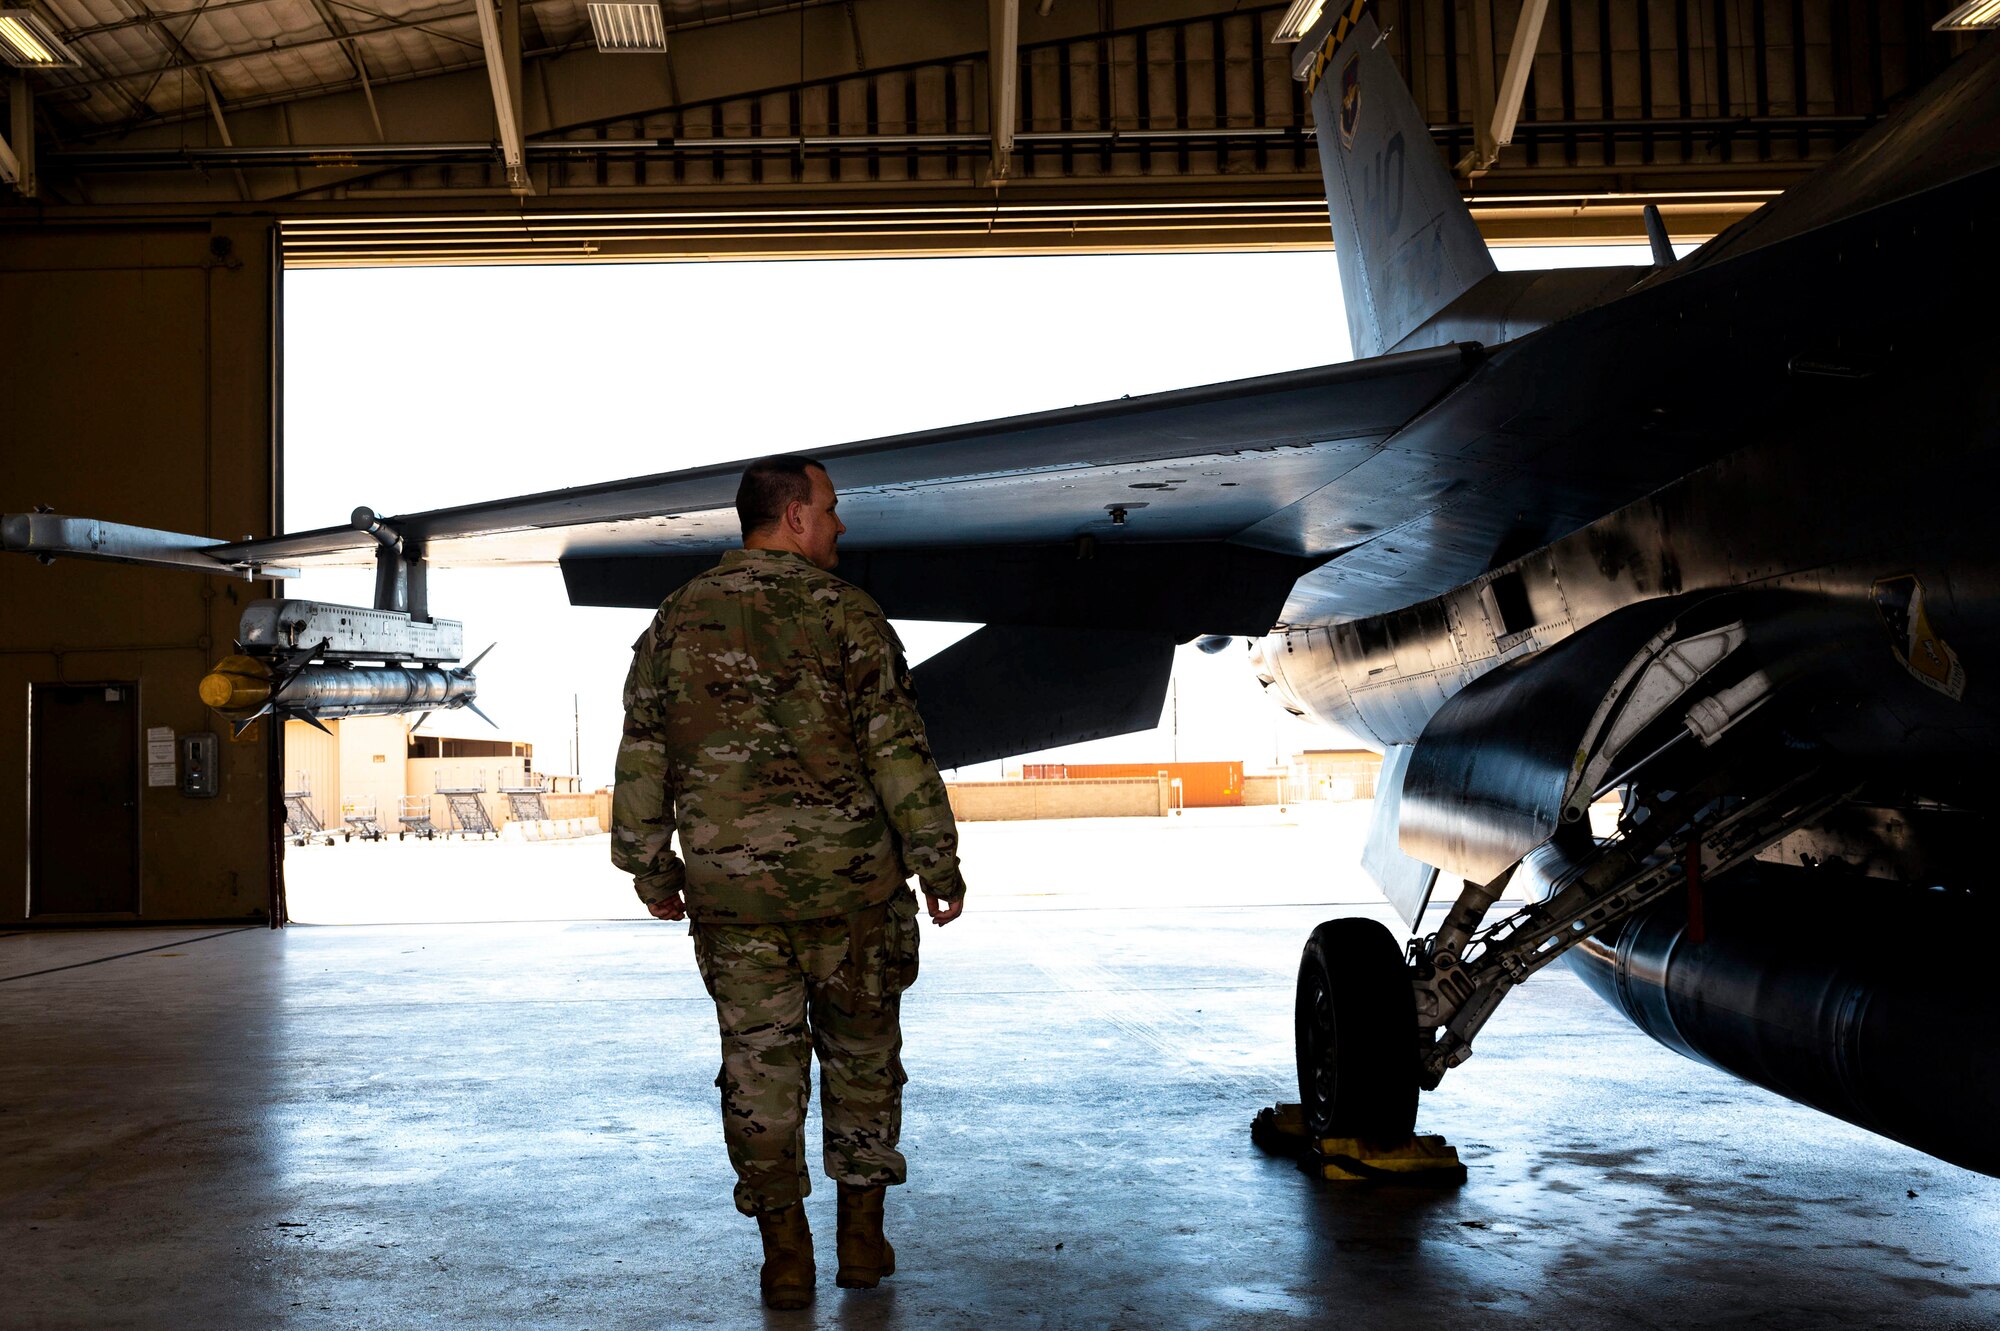 U.S. Air Force Staff. Sgt. Nicholas Clum, 314th Fighter Squadron aviation resource management noncommissioned officer in charge, takes a tour of the flightline and observes a grounded F-16 Viper at Holloman Air Force Base, New Mexico, Aug. 29, 2023. From the earliest stages of mission planning to the return of the aircraft and crew, SARMs serve as those responsible for ensuring airborne operations are executed efficiently and safely. (U.S. Air Force photo by Airman 1st Class Isaiah Pedrazzini)